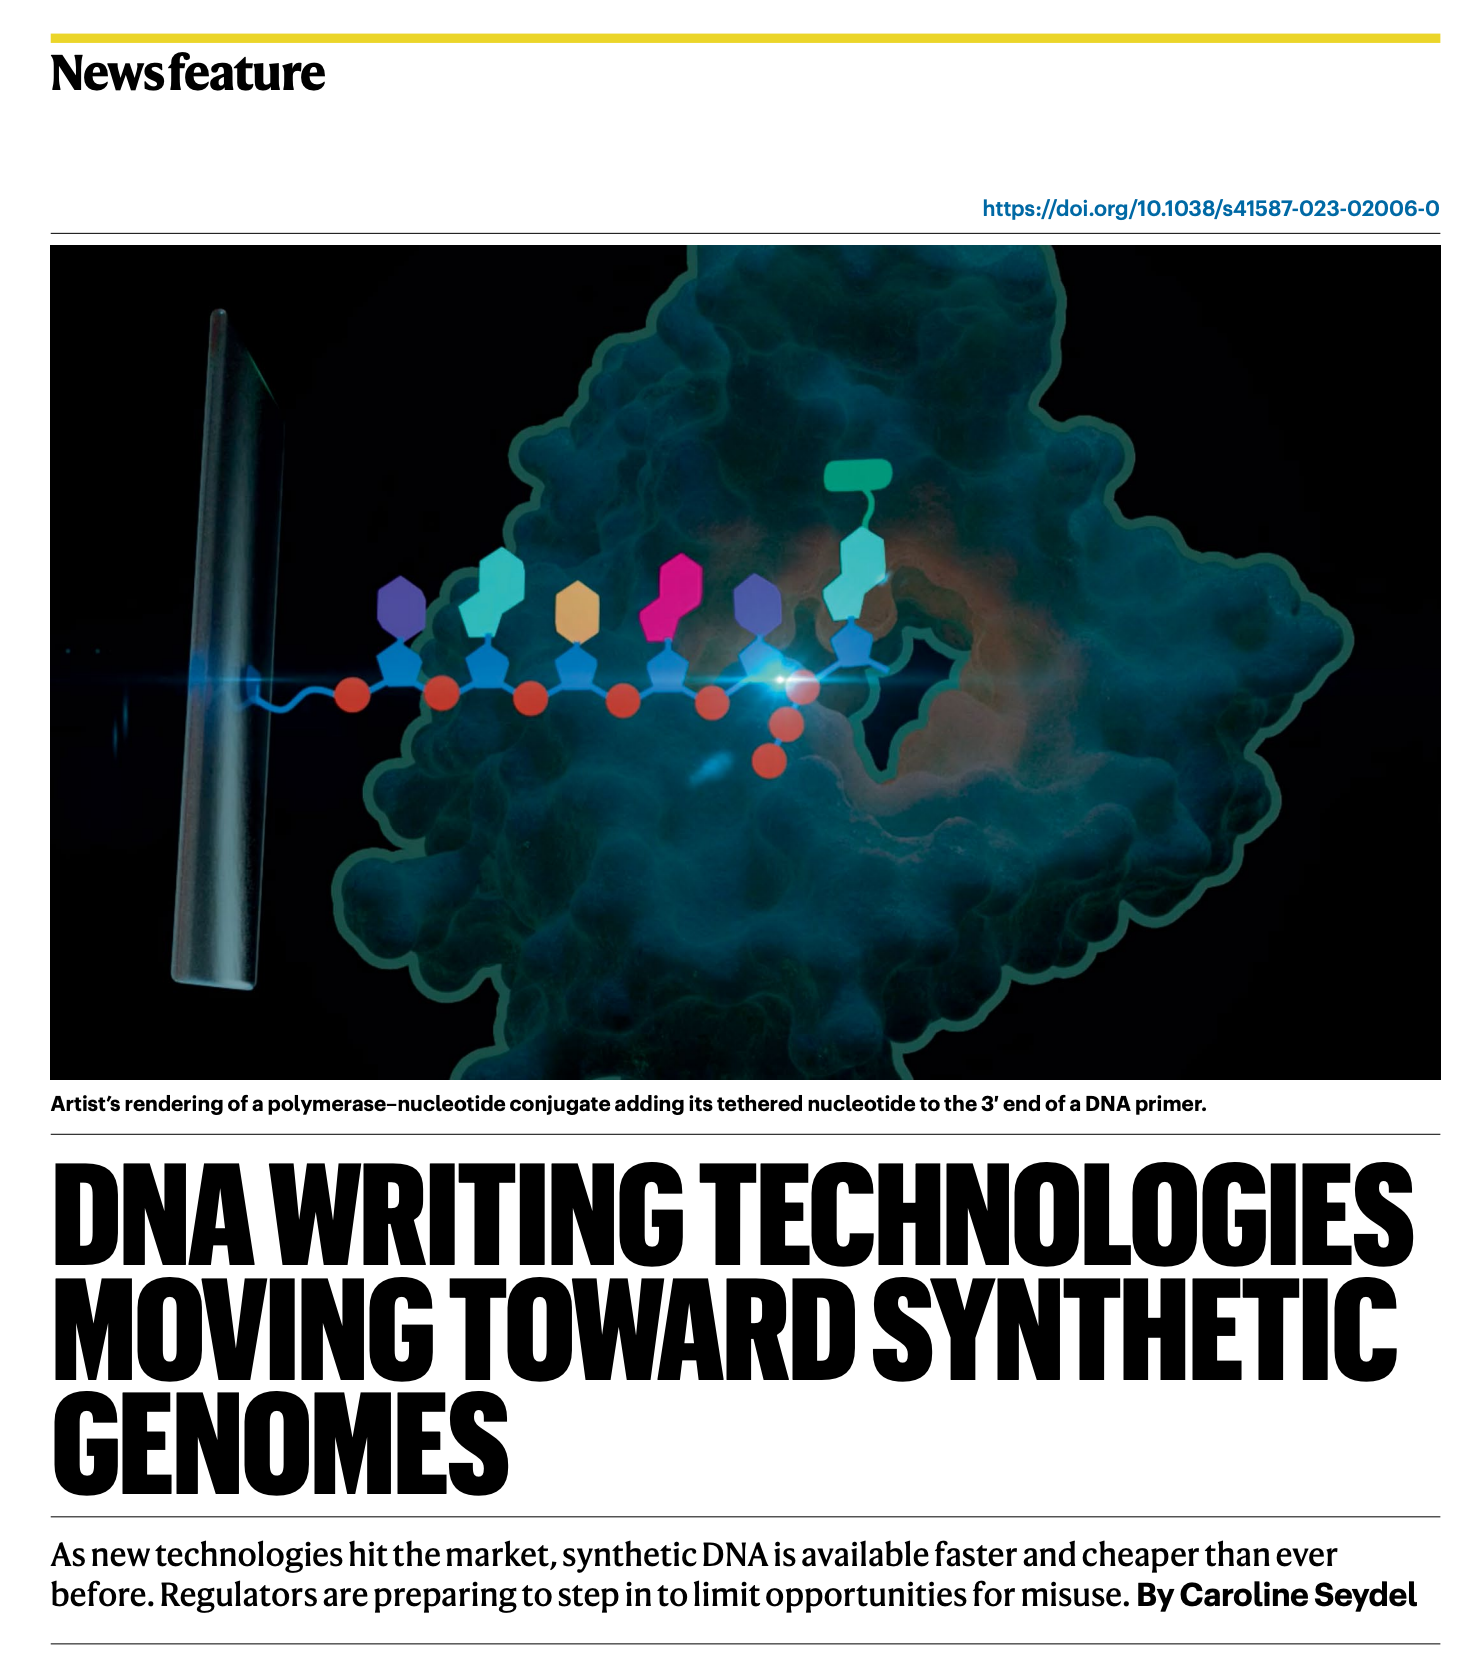 DNA Writing Technologies Moving Towards Synthetic Genomes